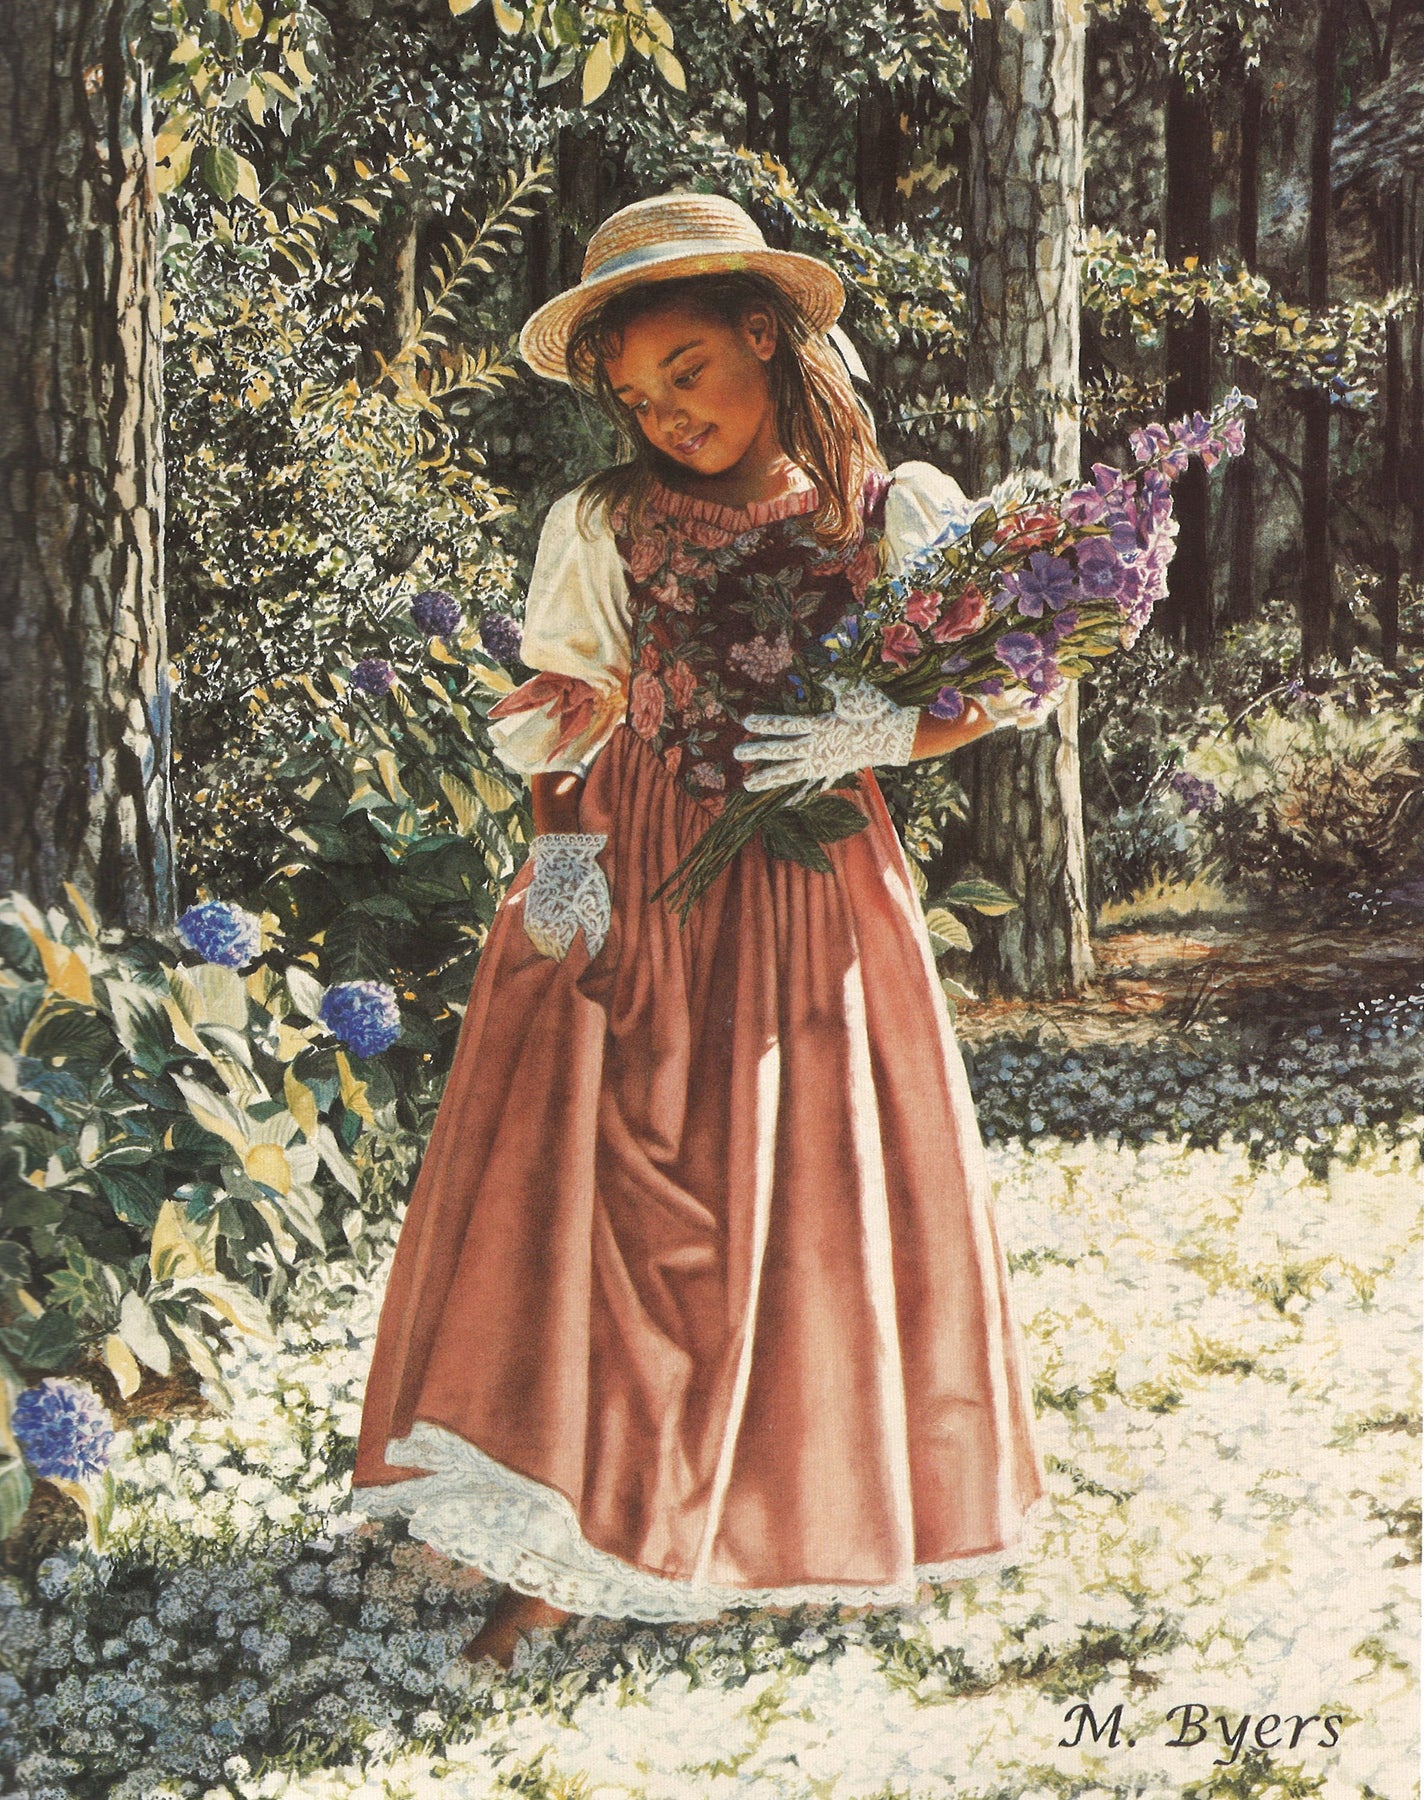 4 of 4: Girl Carrying Flowers by Melinda Byers